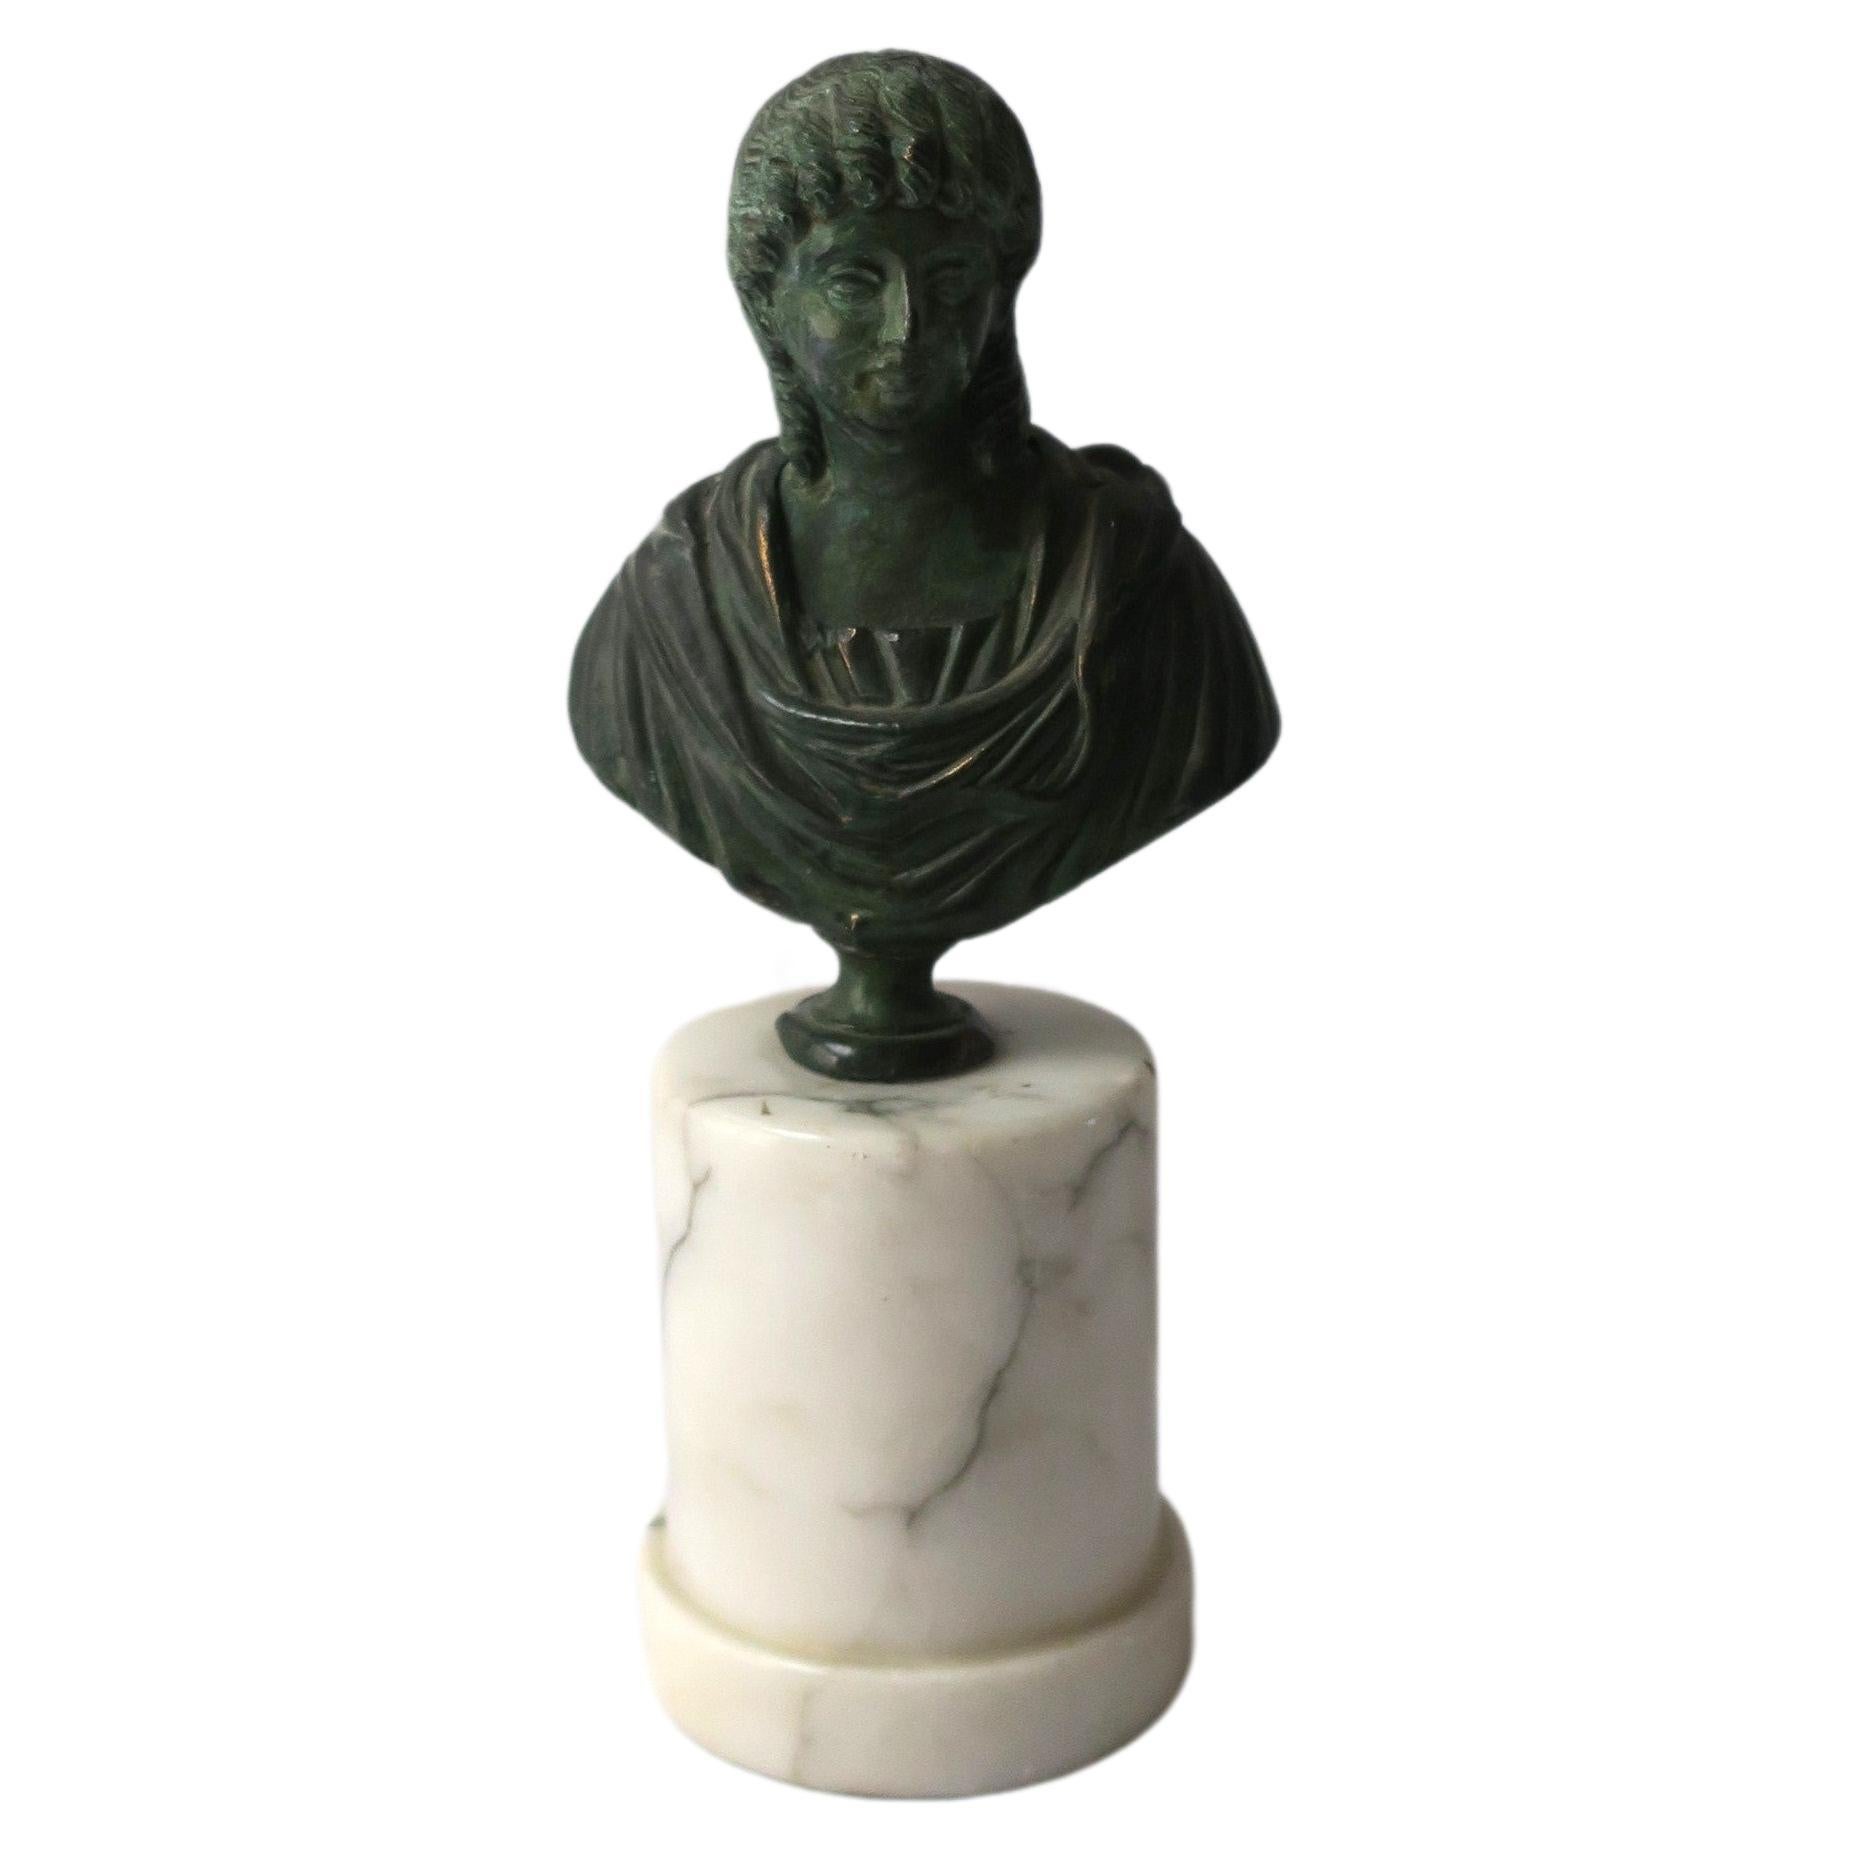 A substantial bronze bust on marble base, circa early-20th century, Europe. Bronze bust has a verdigris finish attached to a cylindrical Carrara marble column plinth base. A great decorative object for a table, shelf, library, etc. Dimensions: 7.75